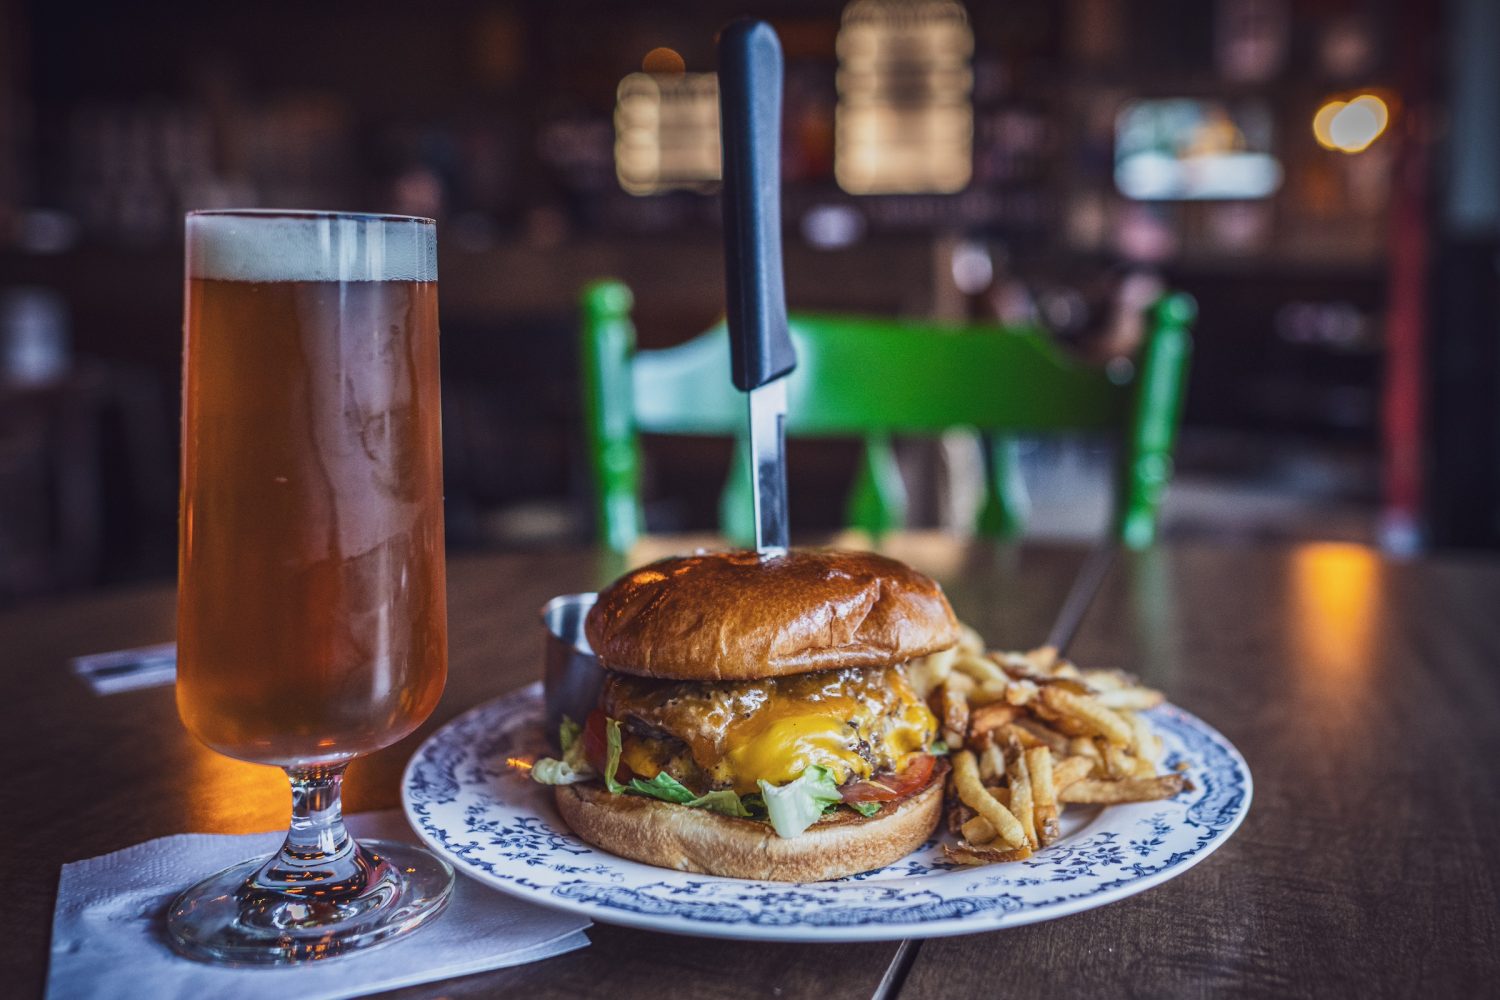 burger with knife going through middle, side of fries, beer on the side, green chair in background